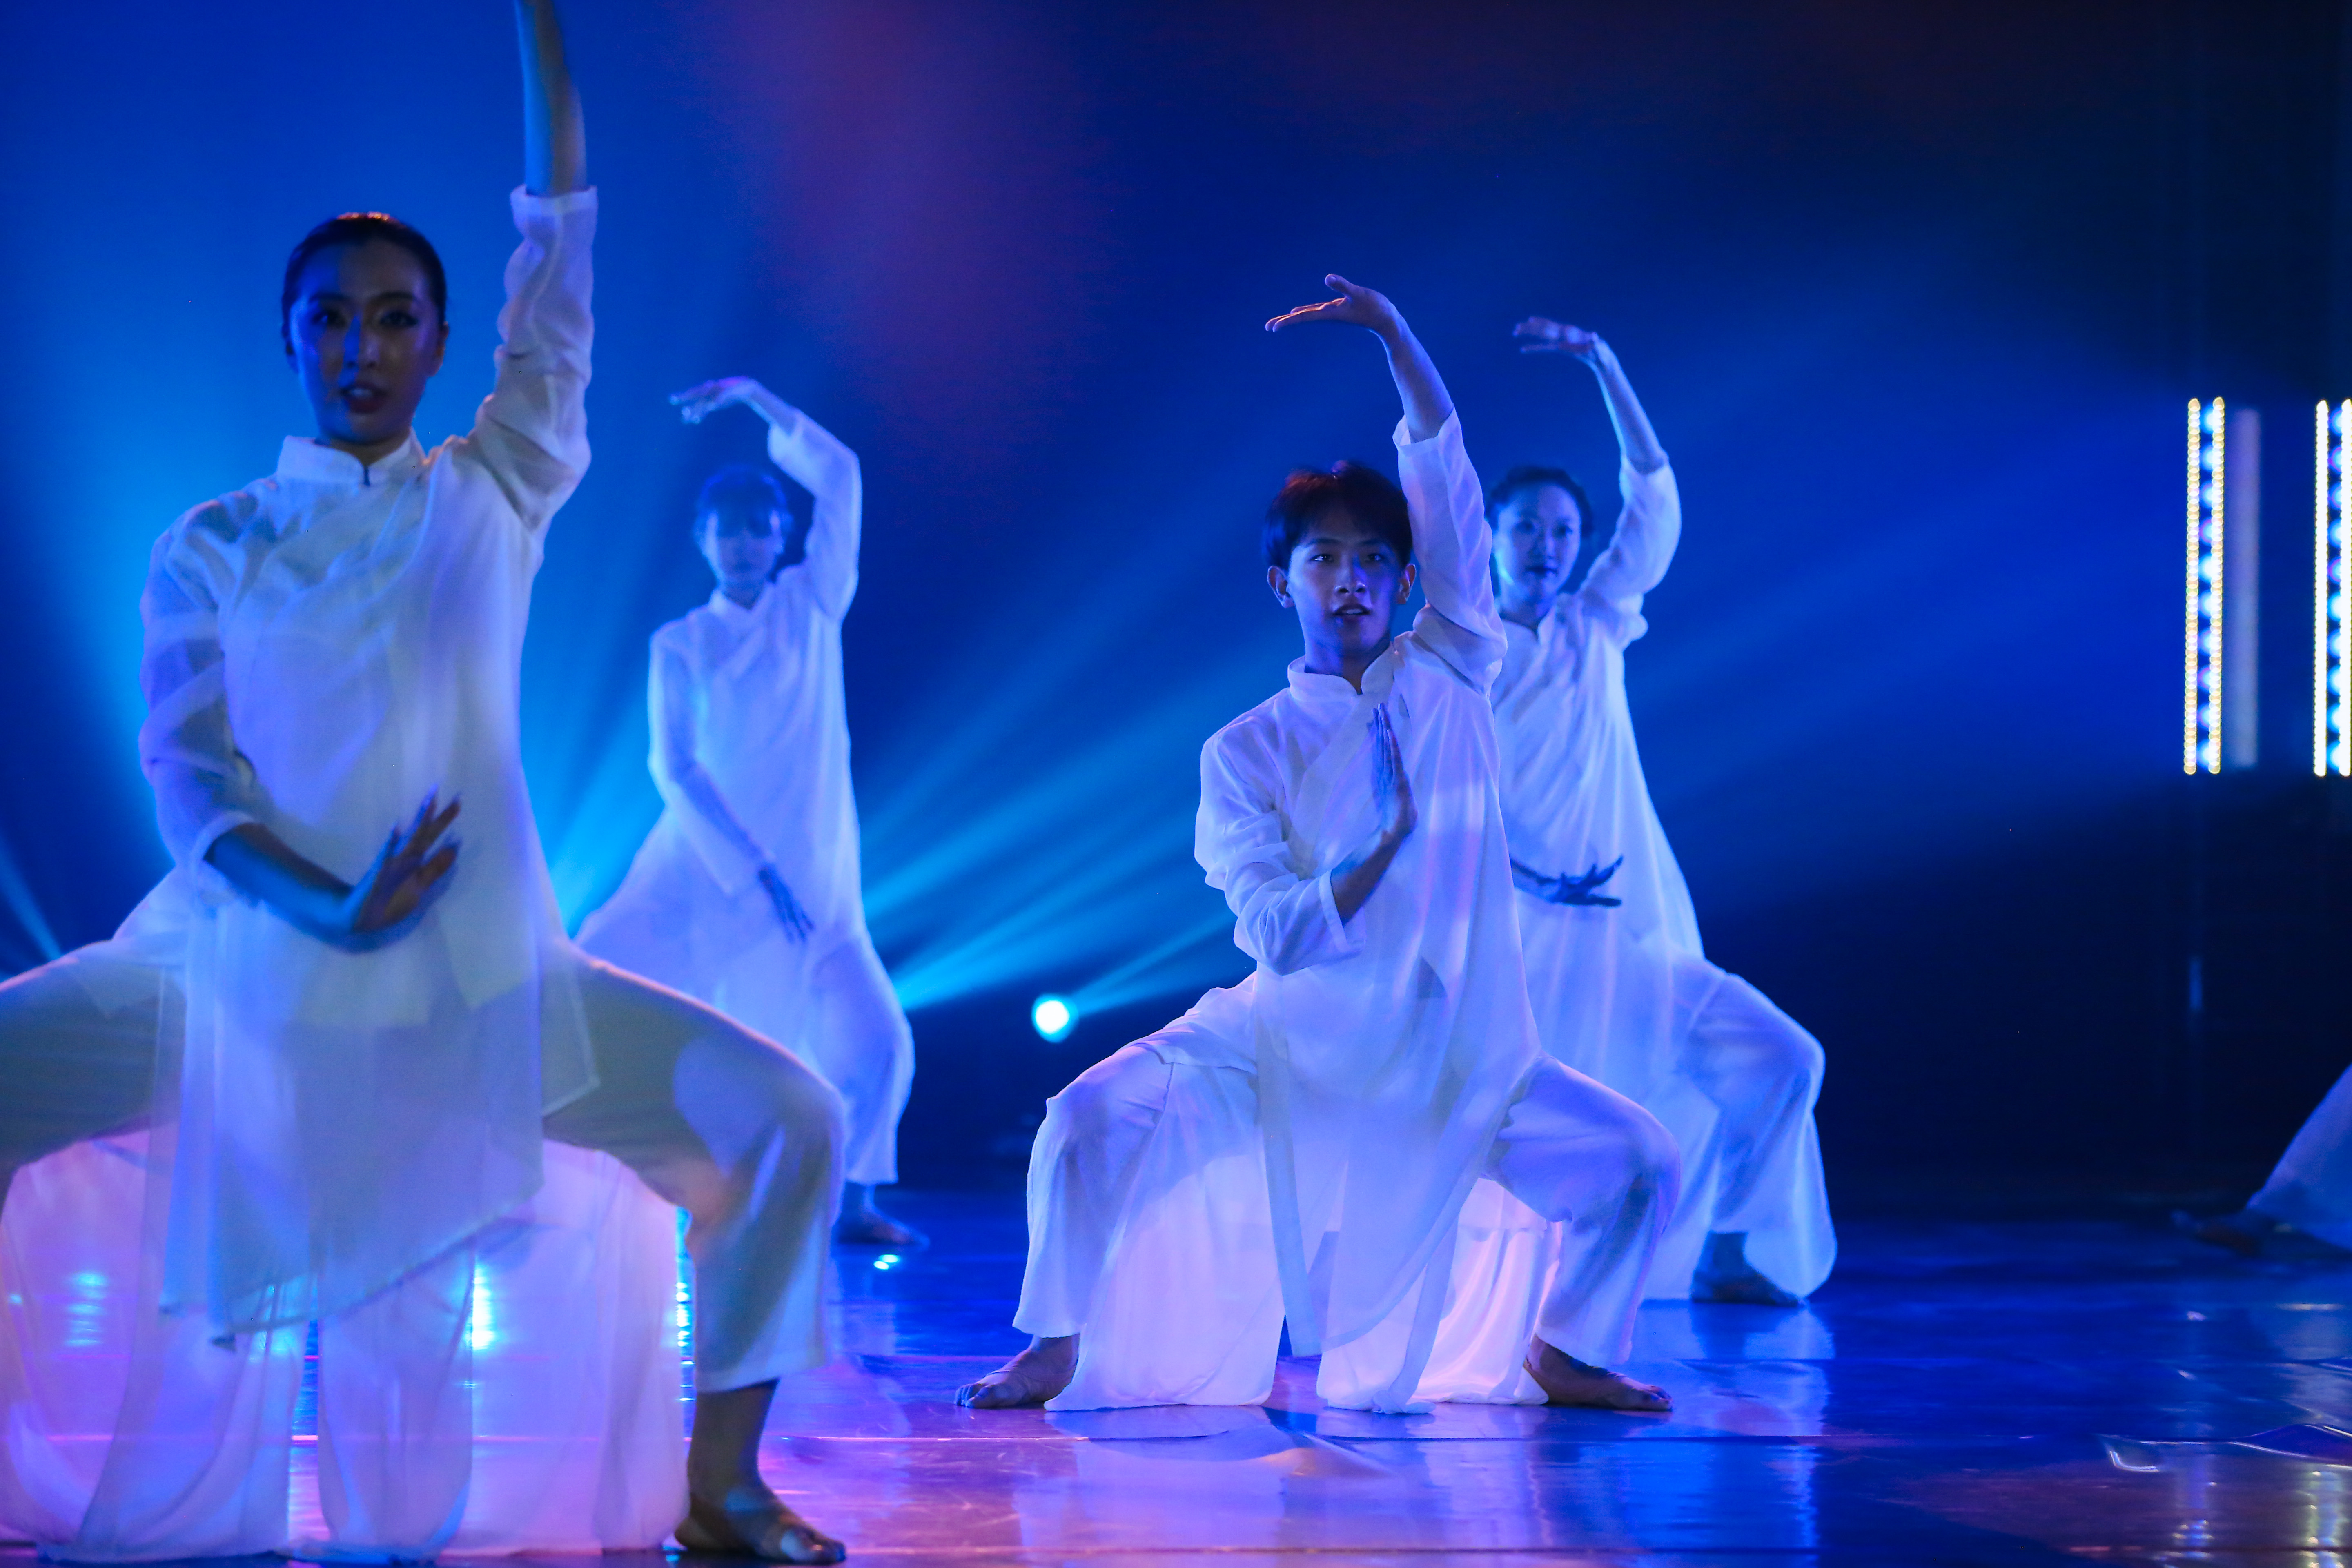 Dancers in flowing white costumes pose 